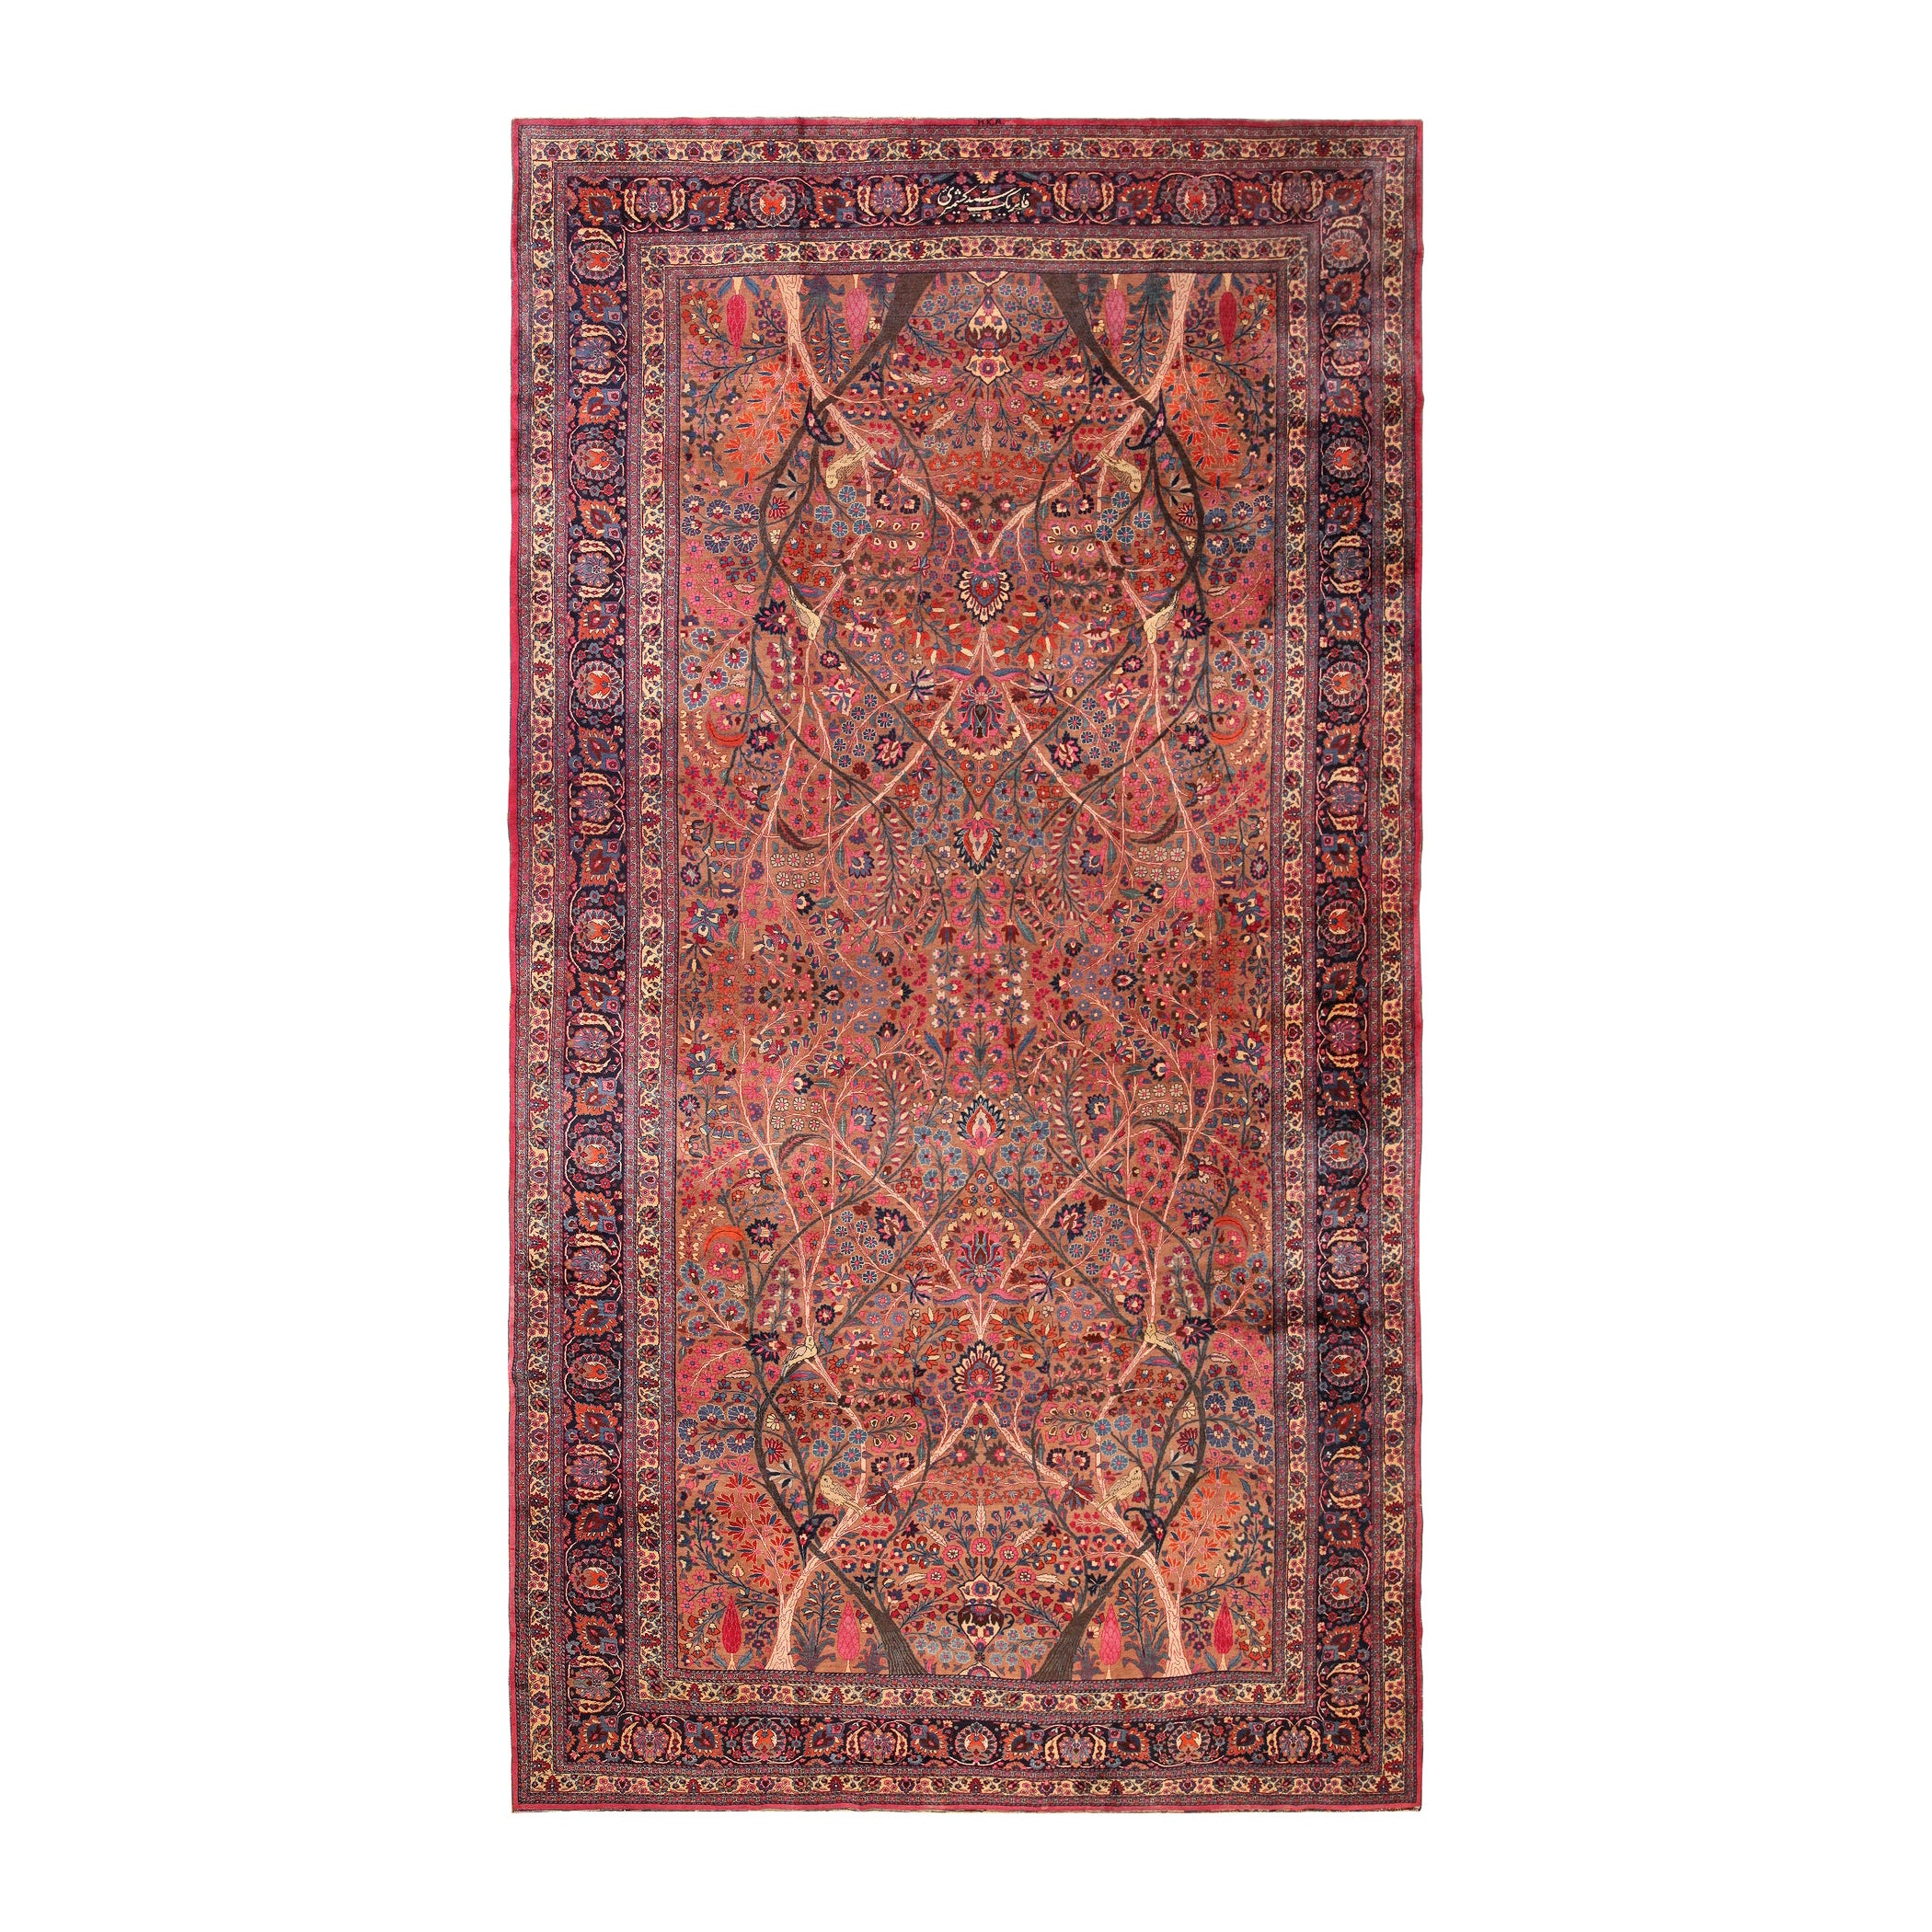 Nazmiyal Collection Antique Persian Khorassan Rug. 12 ft 10 in x 24 ft 9 in